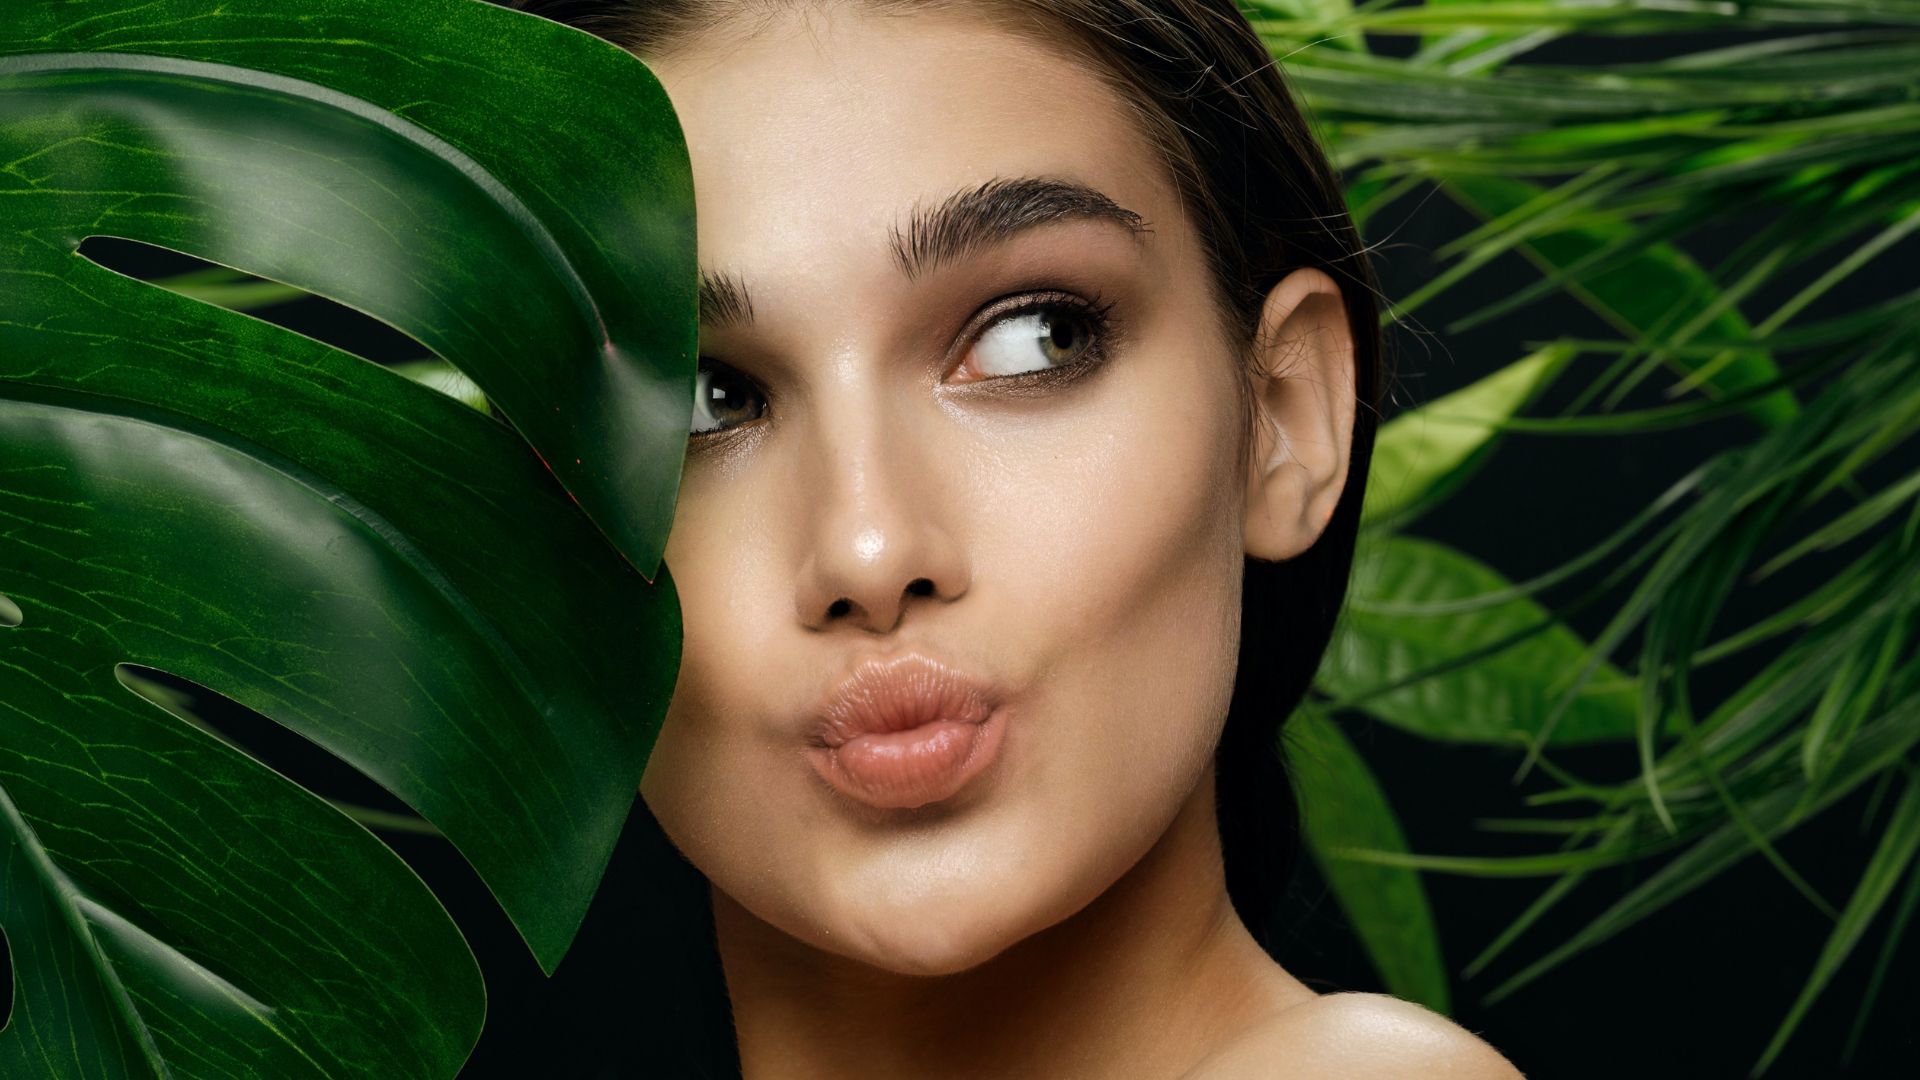 Lip Fillers in Dubai - Woman Pouting Between the Leaves